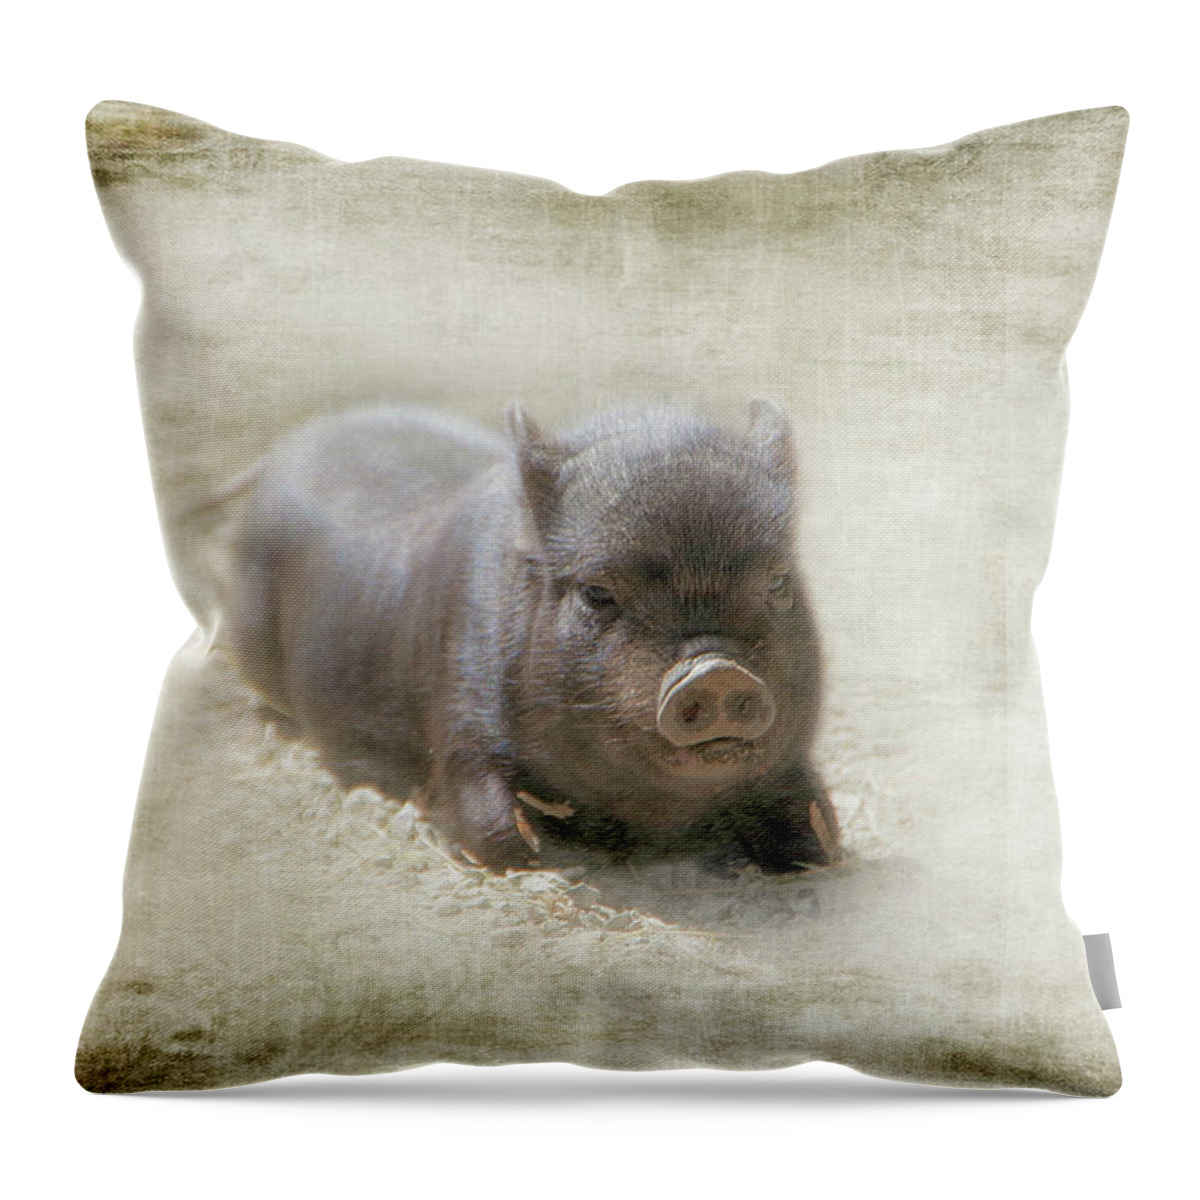 Pig Throw Pillow featuring the photograph One Little Piggy by Marilyn Wilson